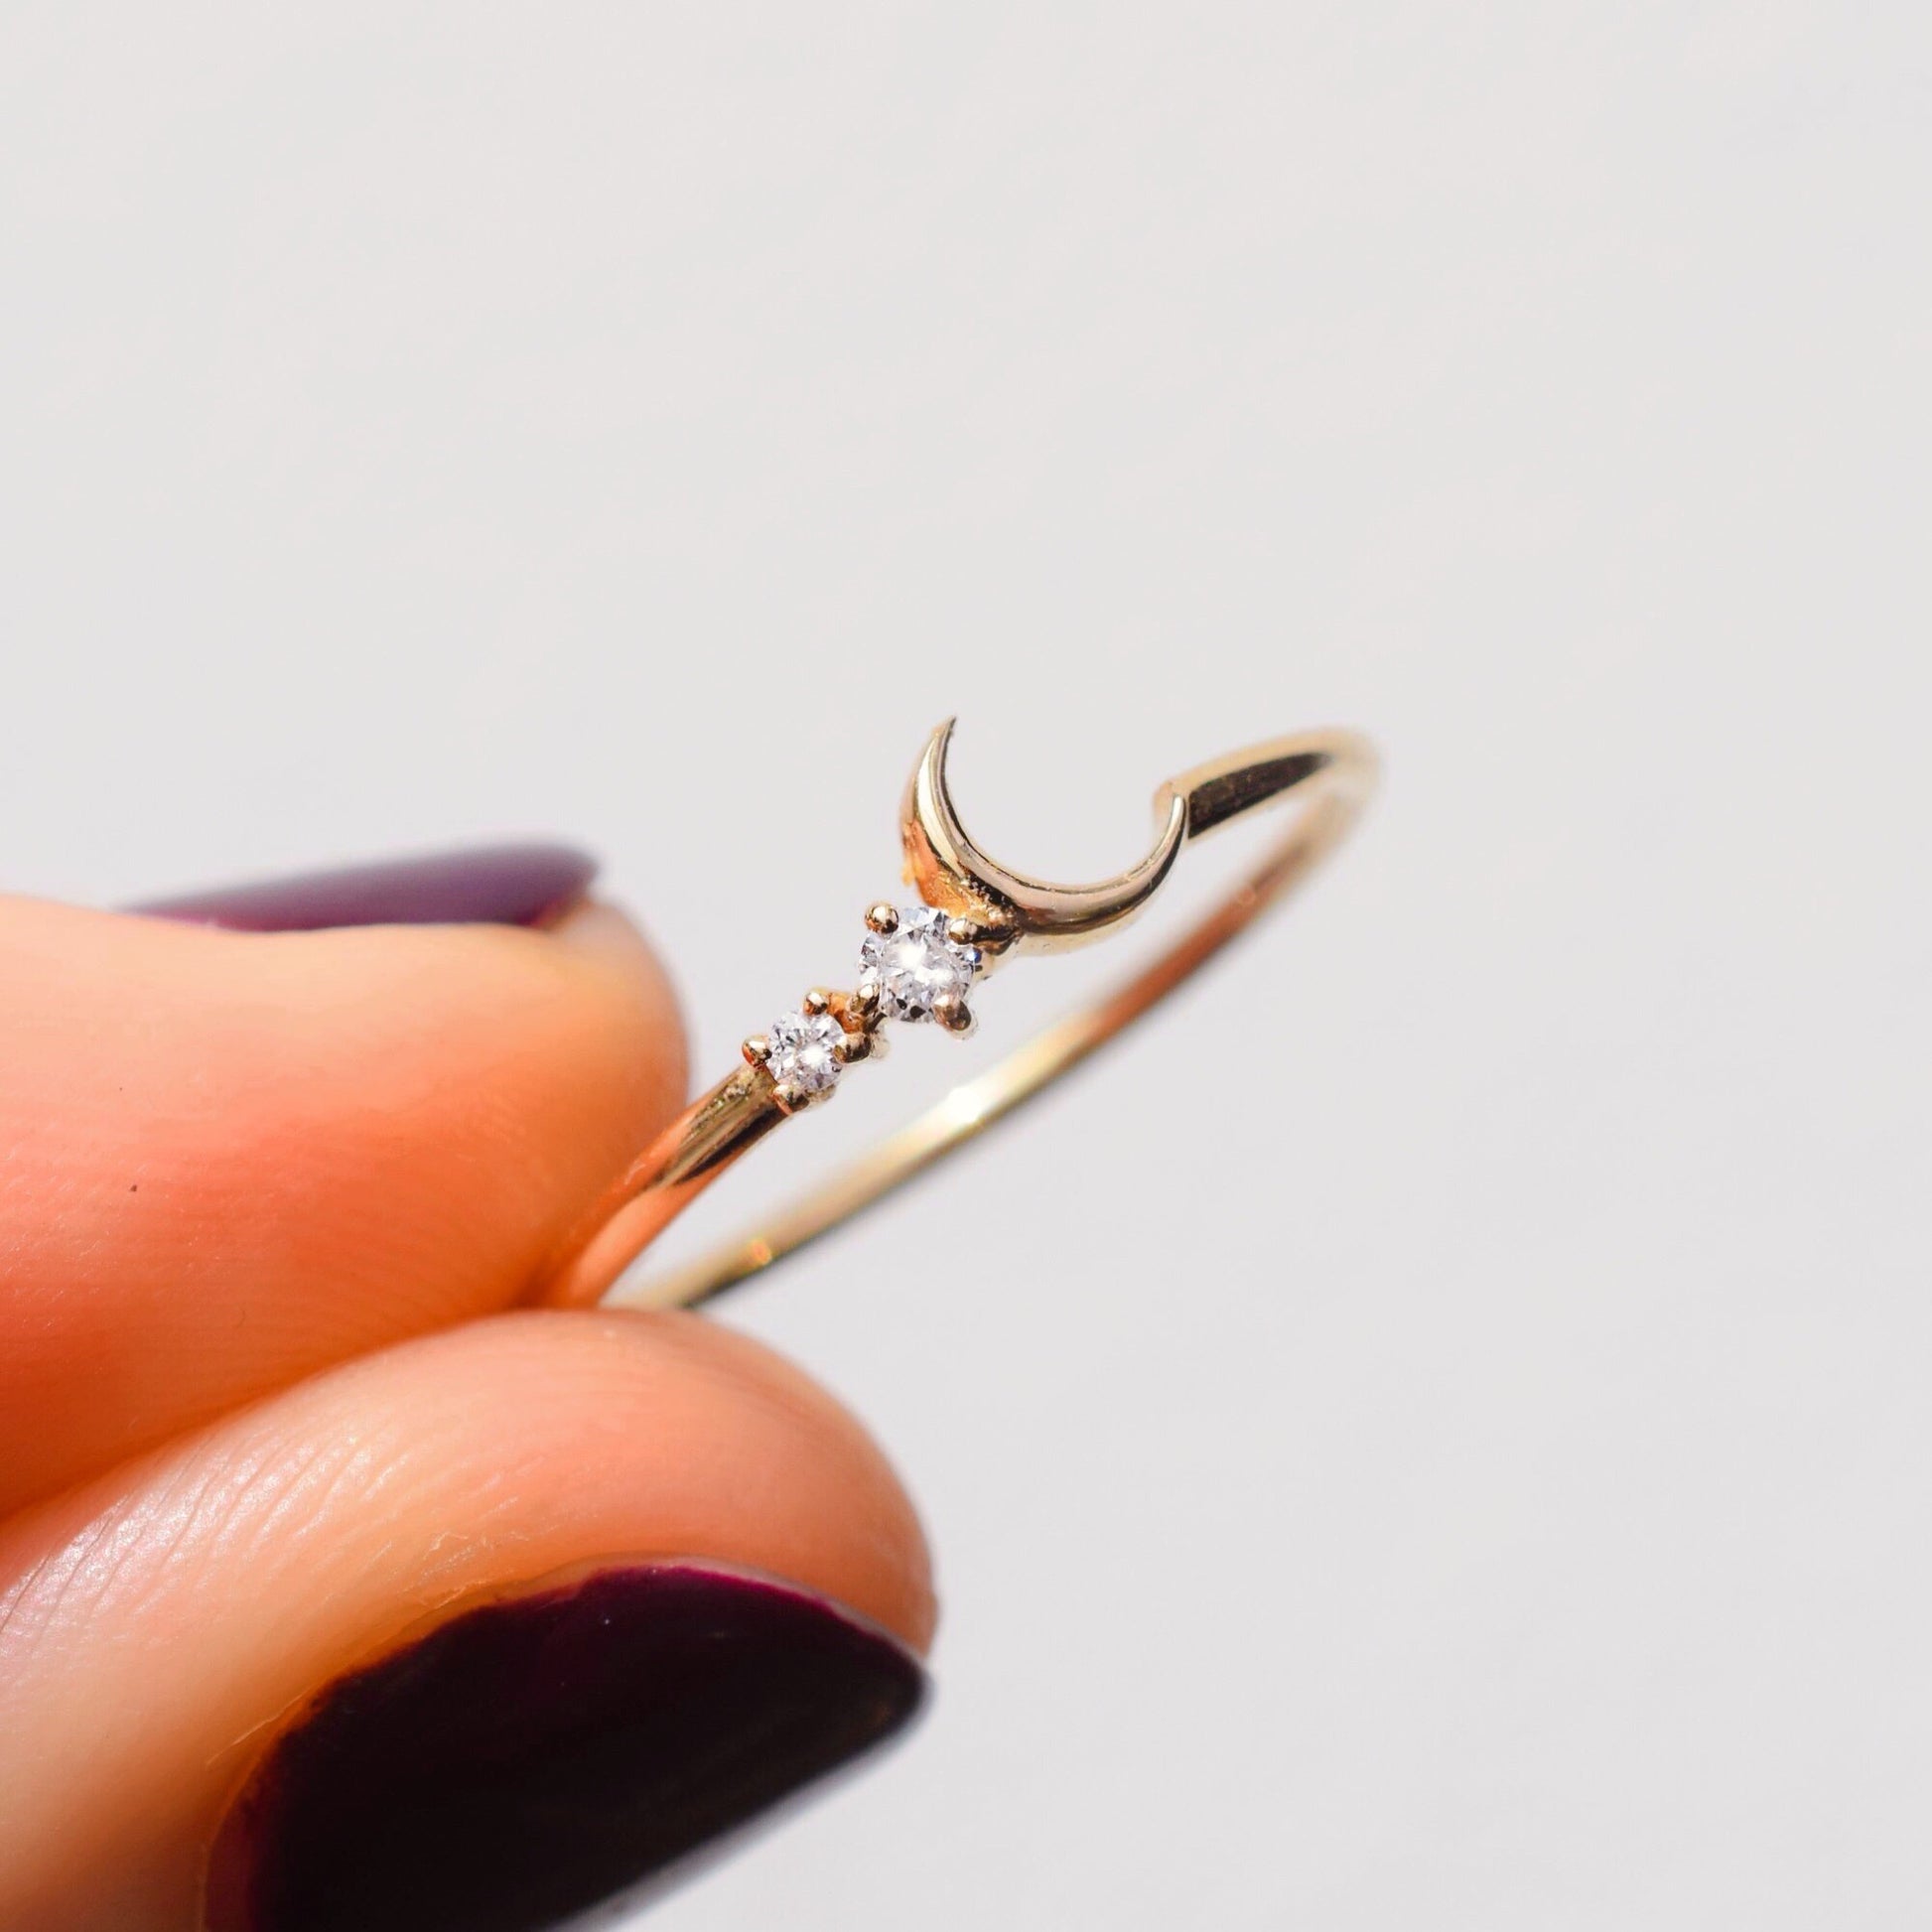 14kt Gold Fly me to the Moon Ring by La Kaiser. Solid gold with two diamonds. A La Kaiser favourite. Exclusive in South Africa on Collective and Co online jewellery store